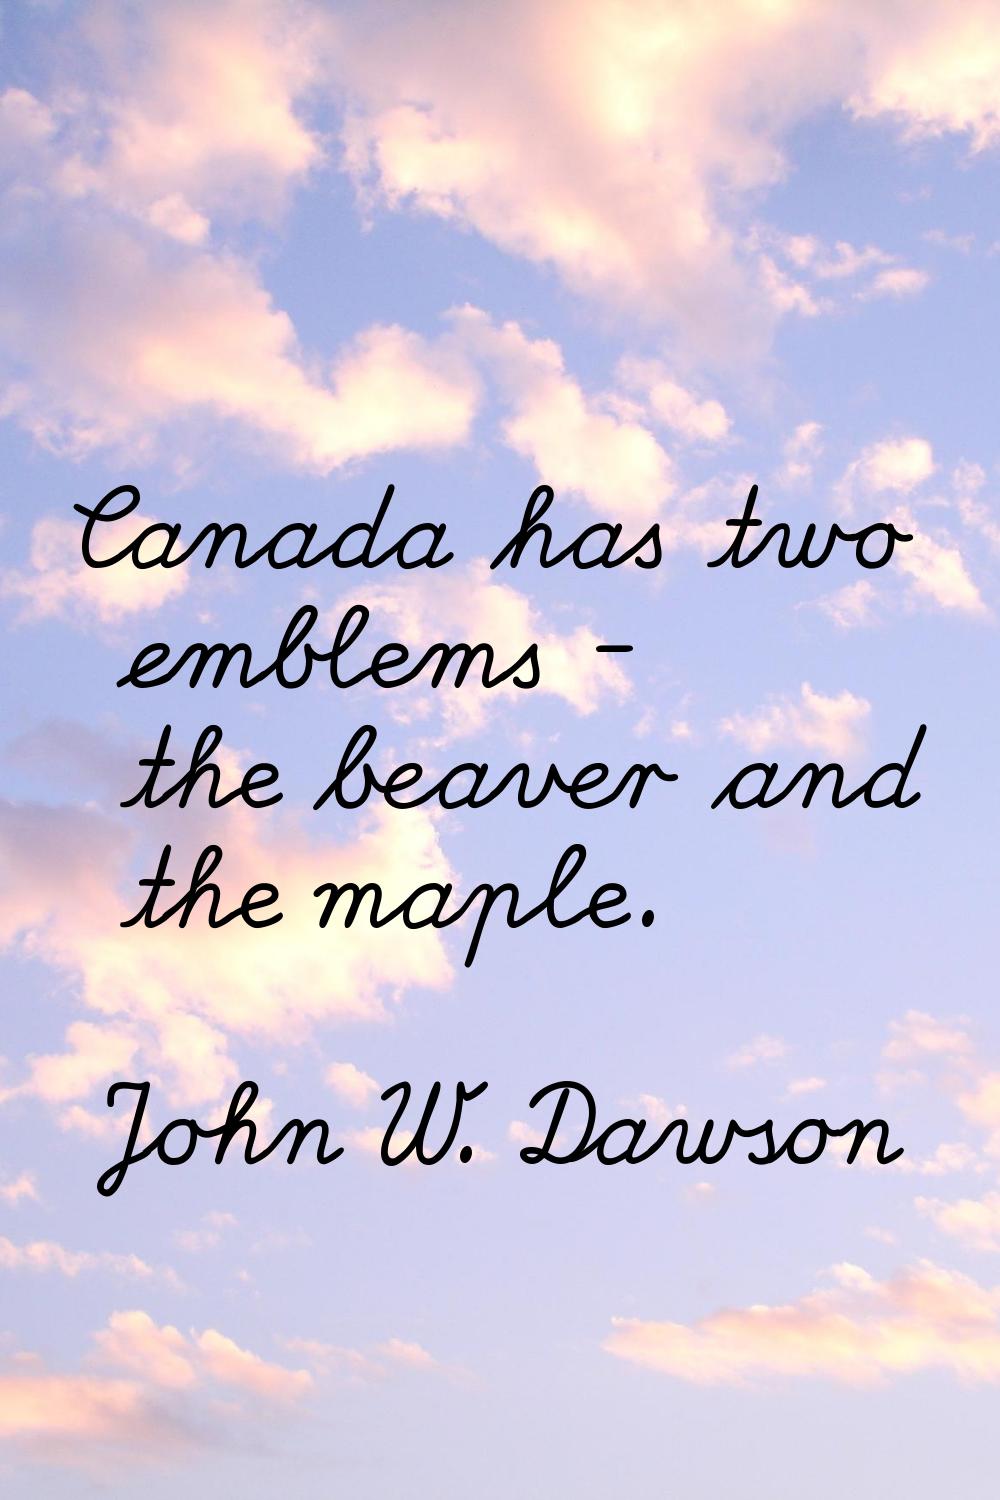 Canada has two emblems - the beaver and the maple.